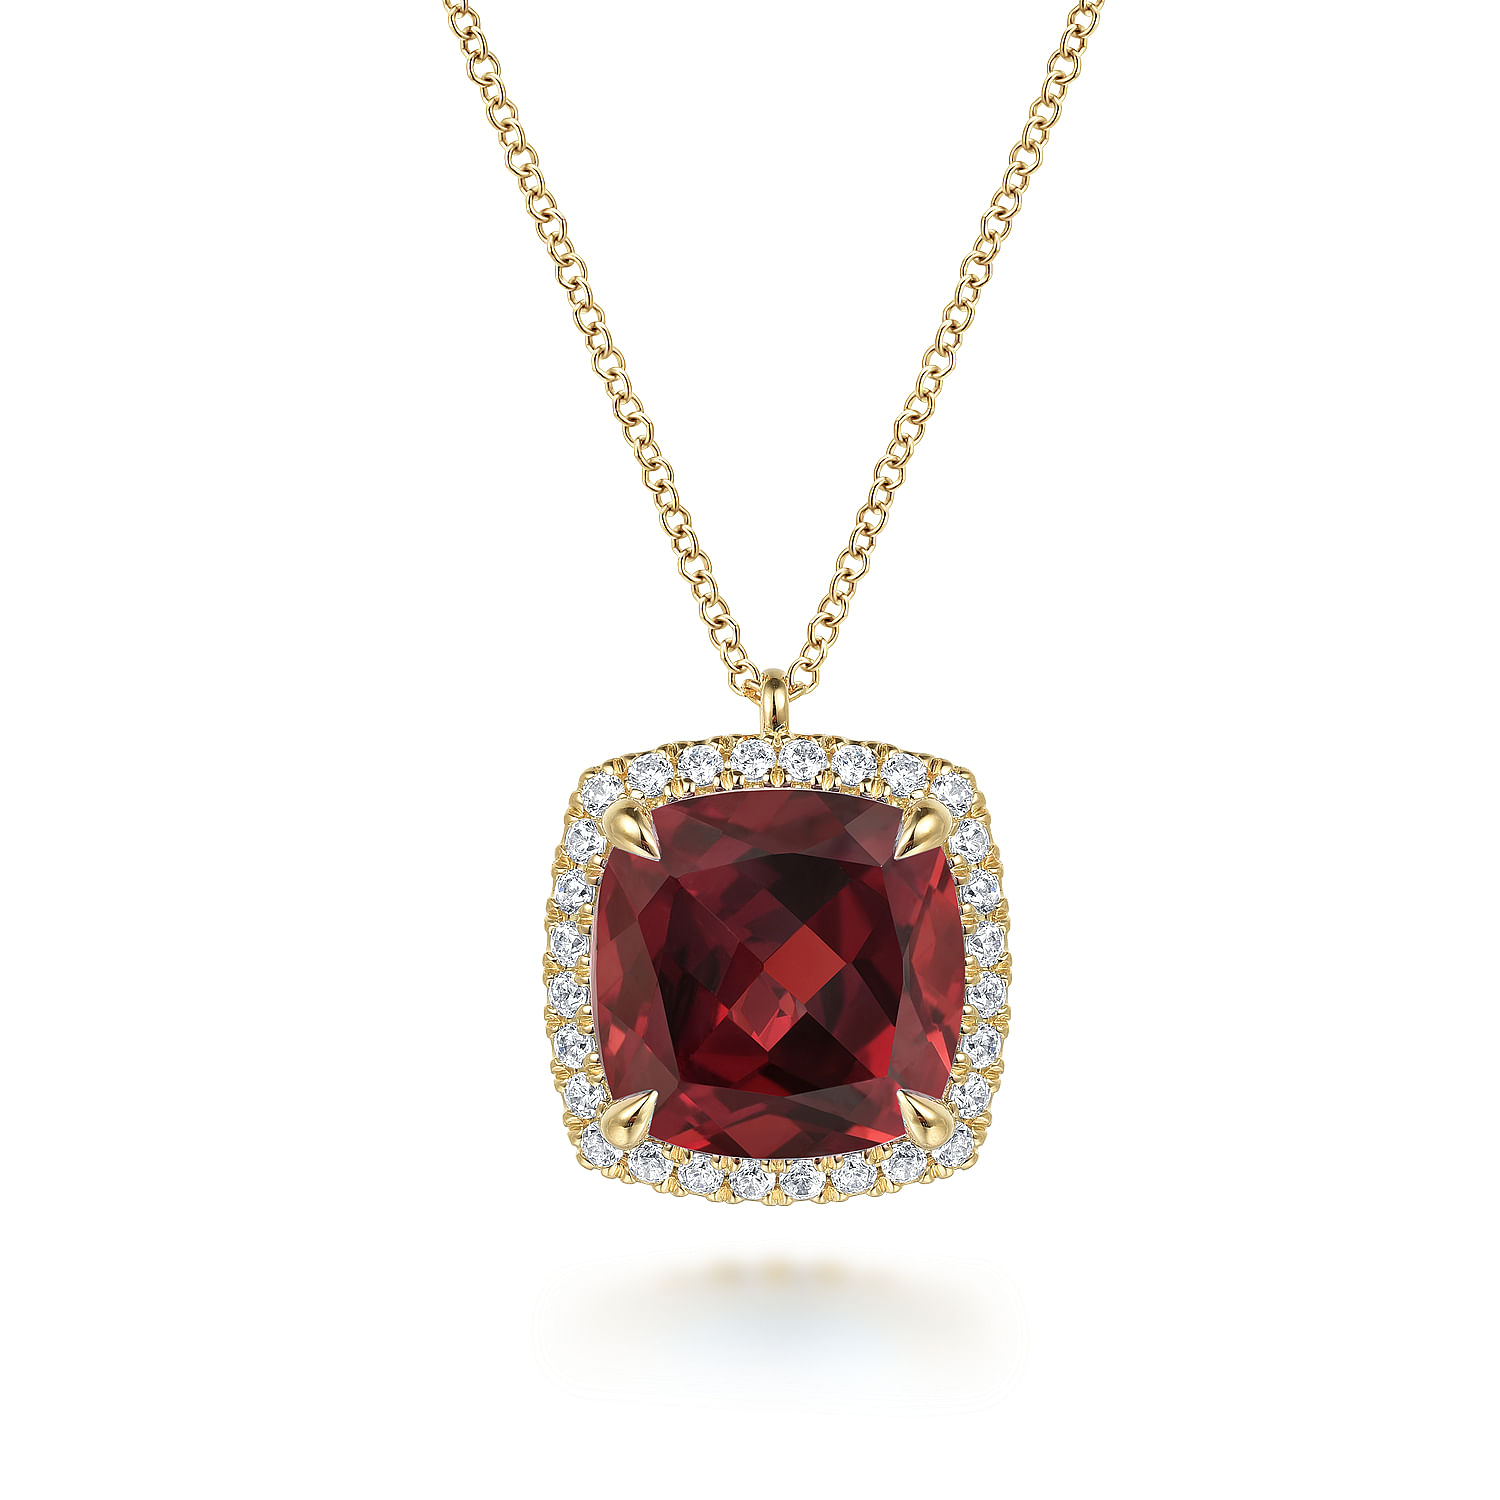 14K Yellow Gold Diamond and Garnet Cushion Cut Necklace With Flower Pattern J-Back